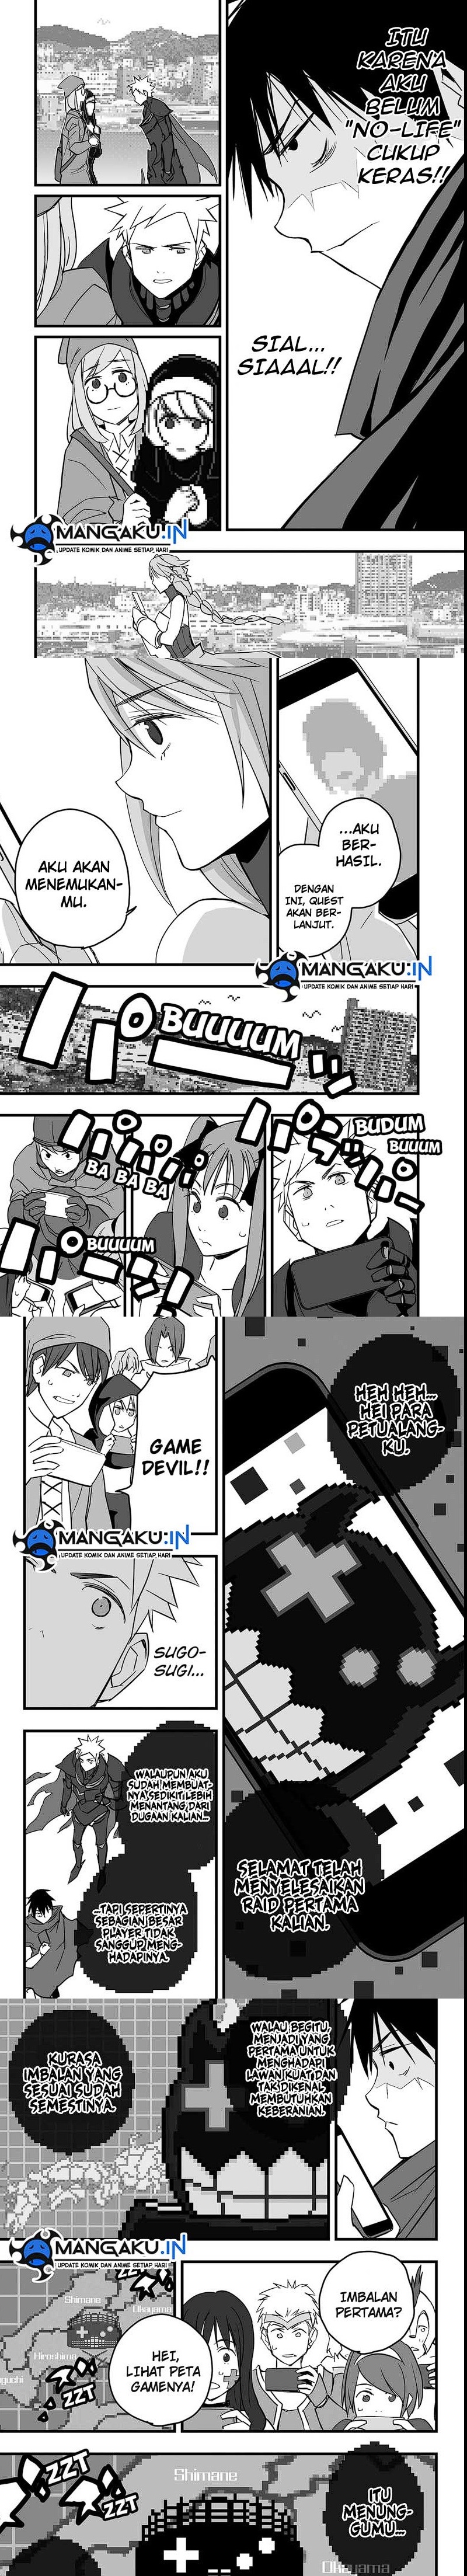 The Game Devil Chapter 12 - 51